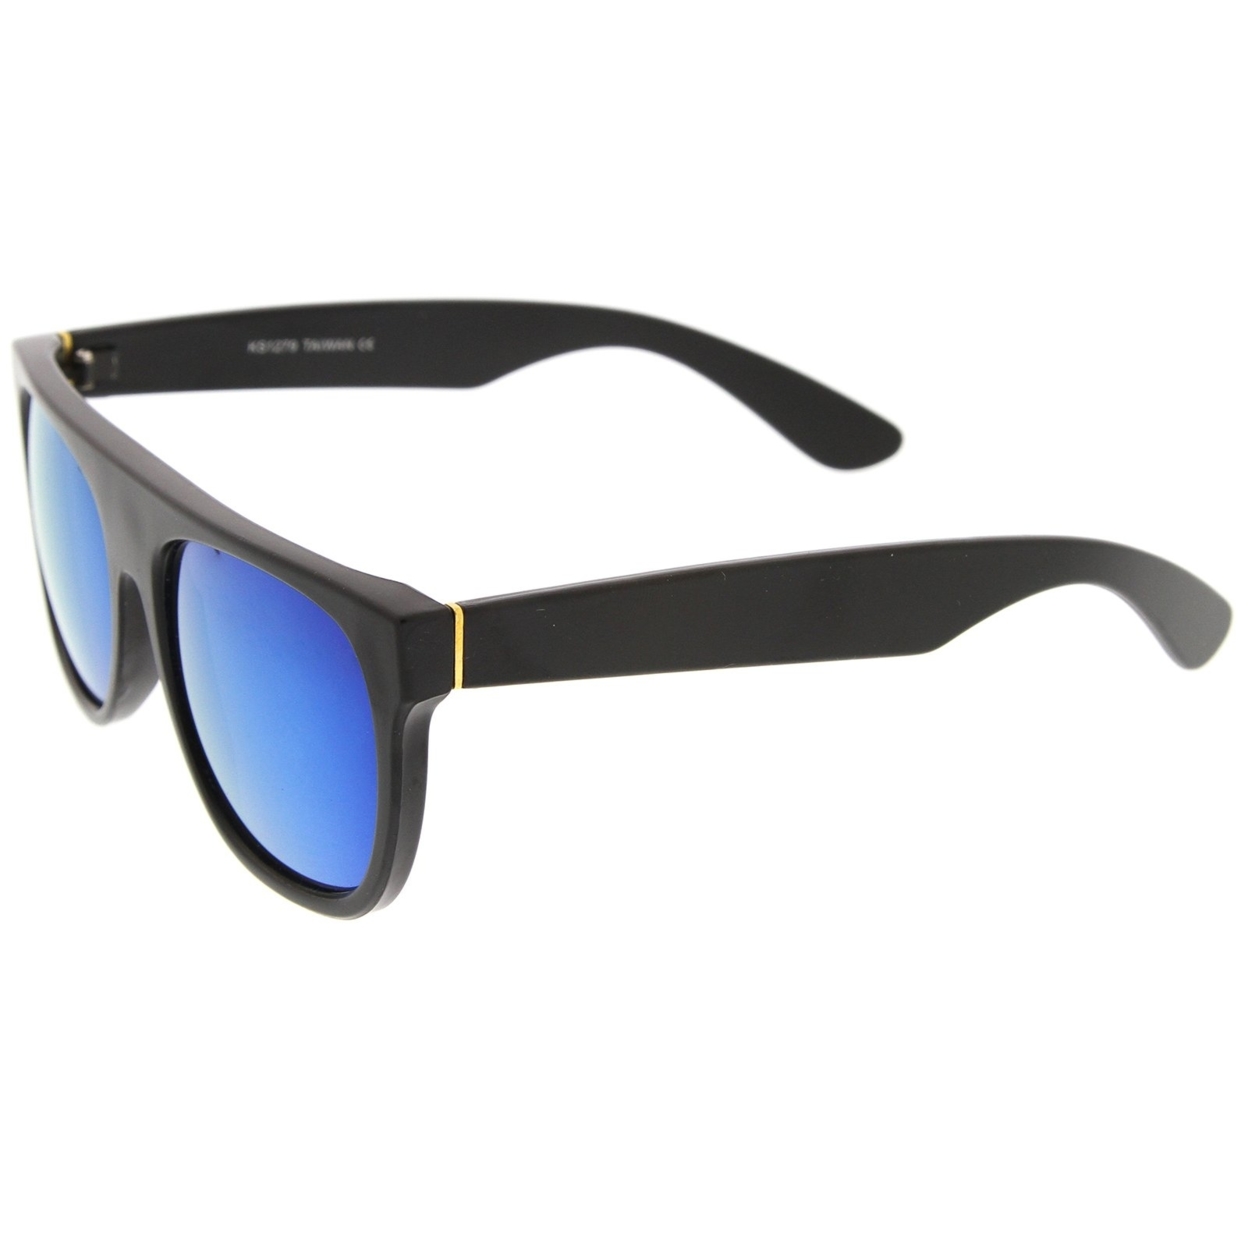 Modern Super Flat-Top Wide Temple Colored Mirror Lens Horn Rimmed Sunglasses 55mm - Shiny Clear / Blue Mirror